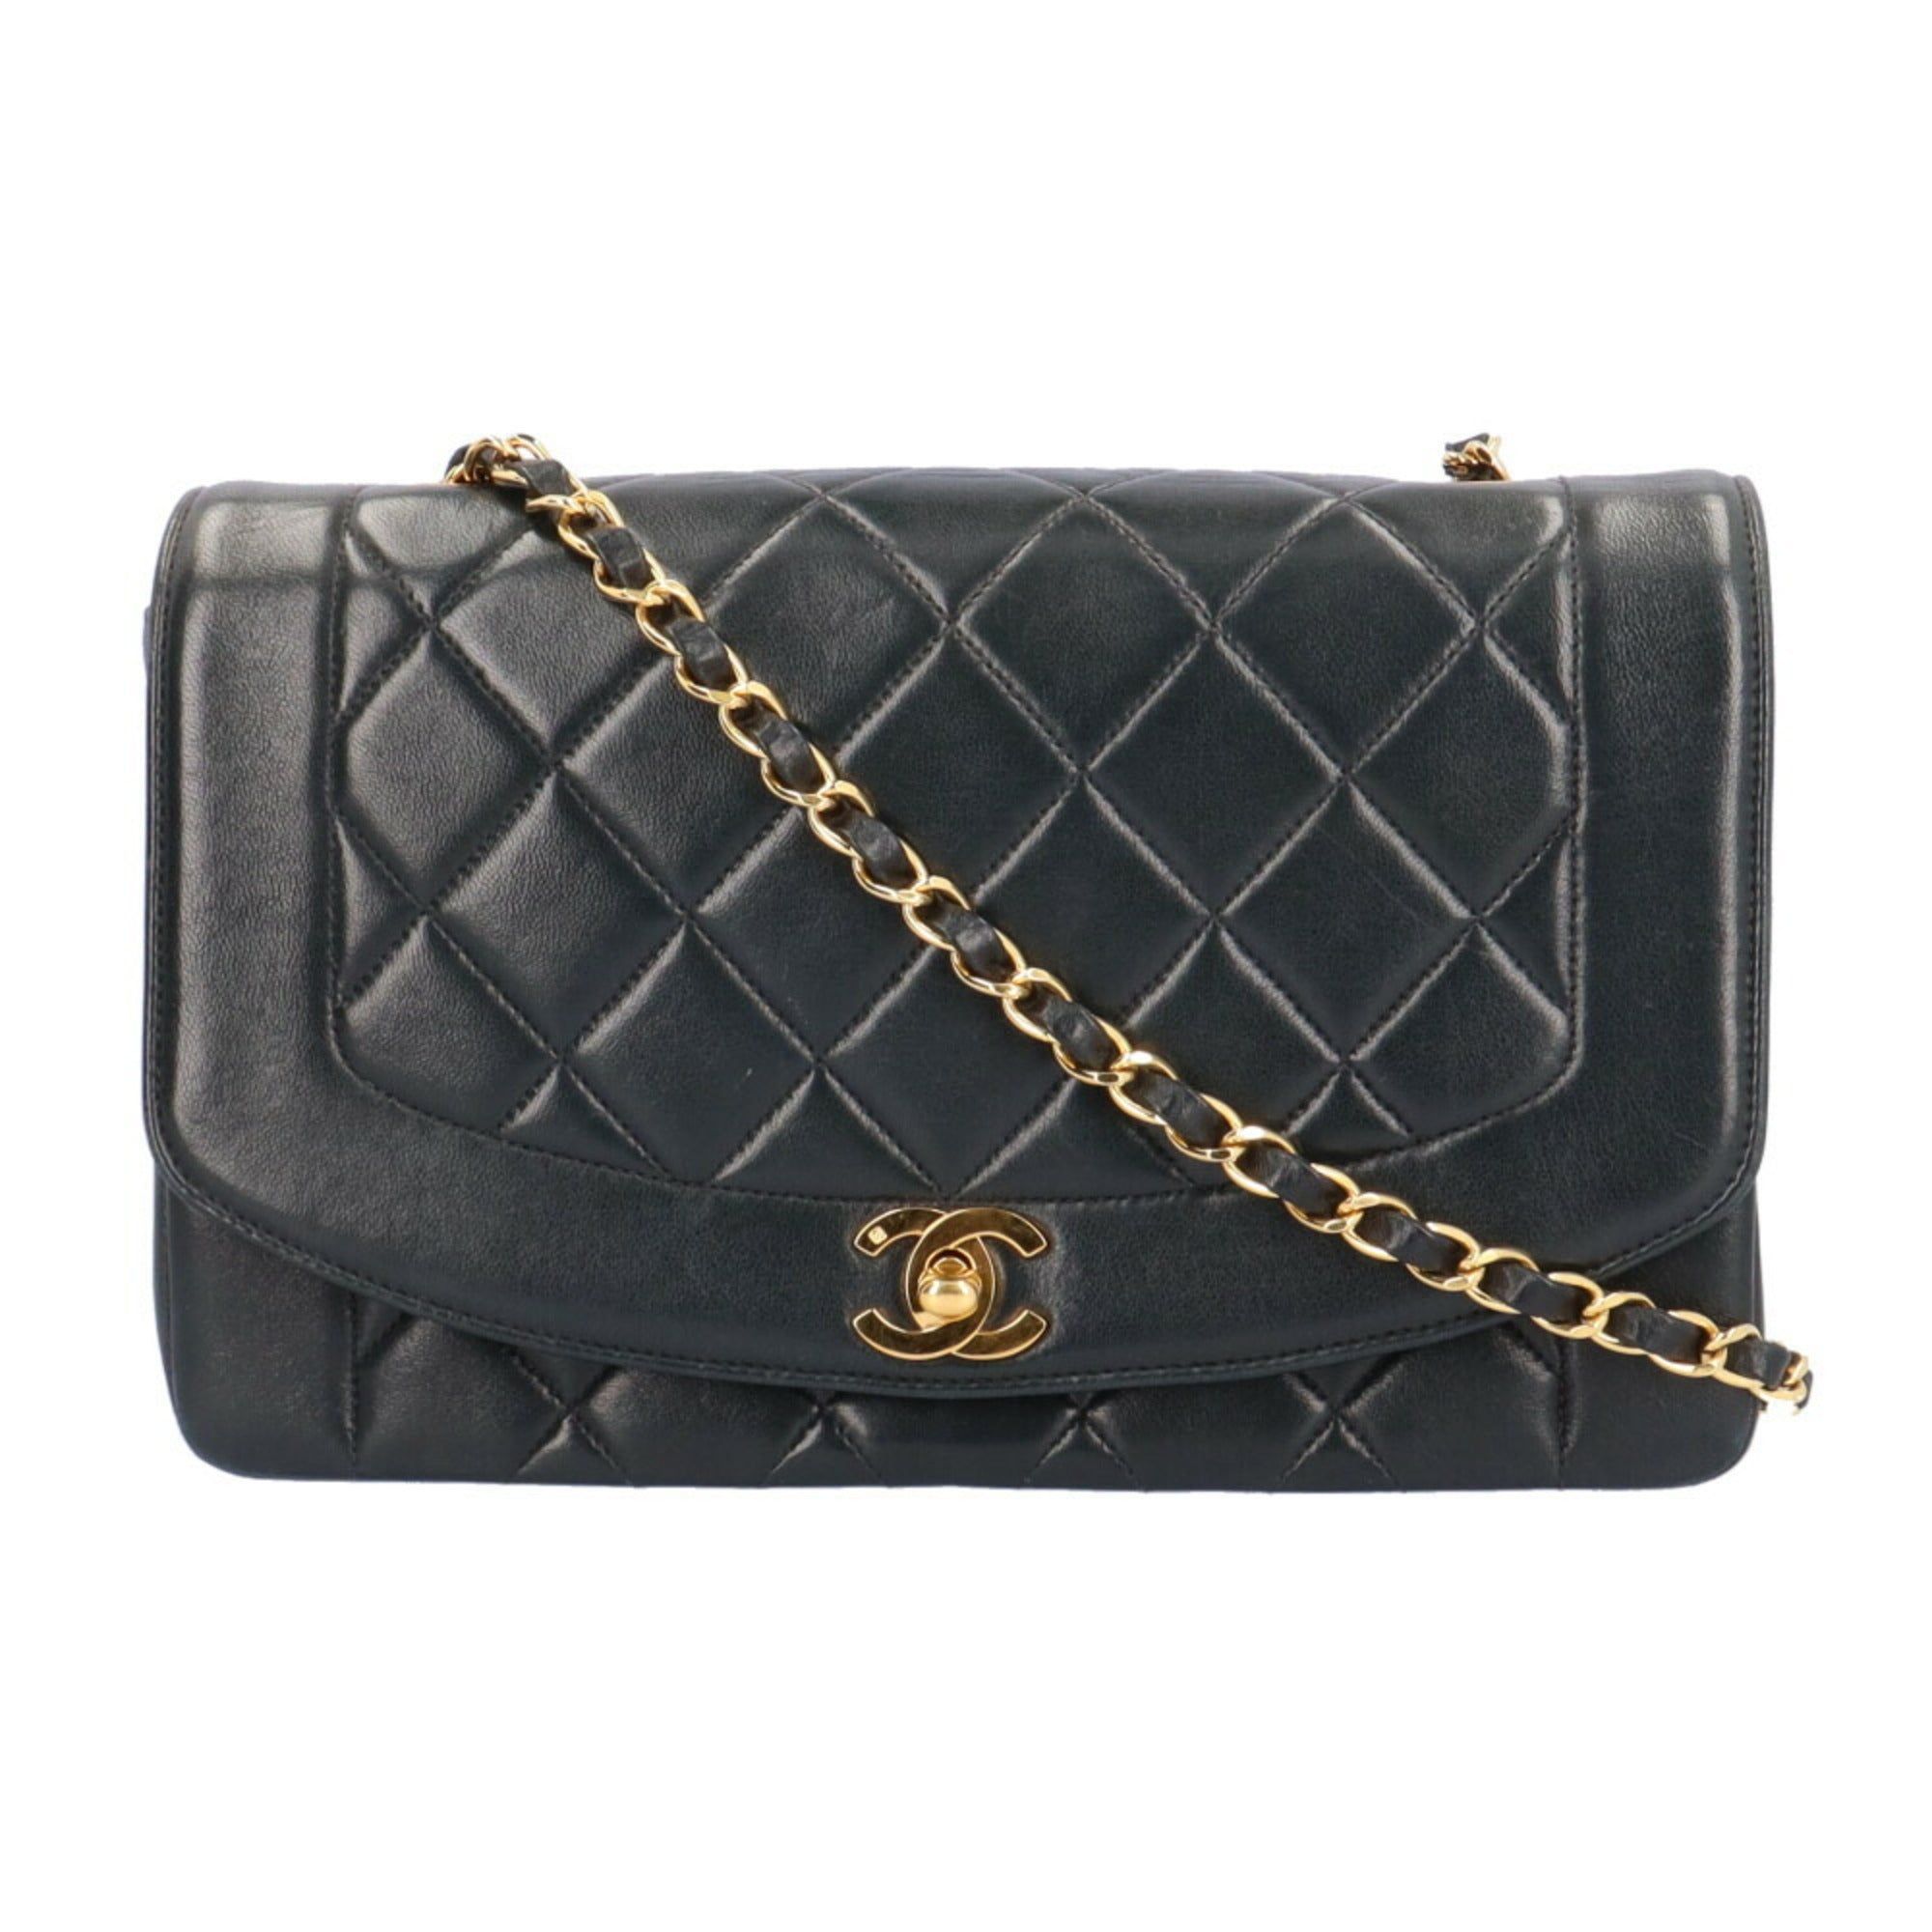 Chanel CHANEL Diana Chain Shoulder Bag Leather Black Women's Size ONE SIZE - 1 Preview